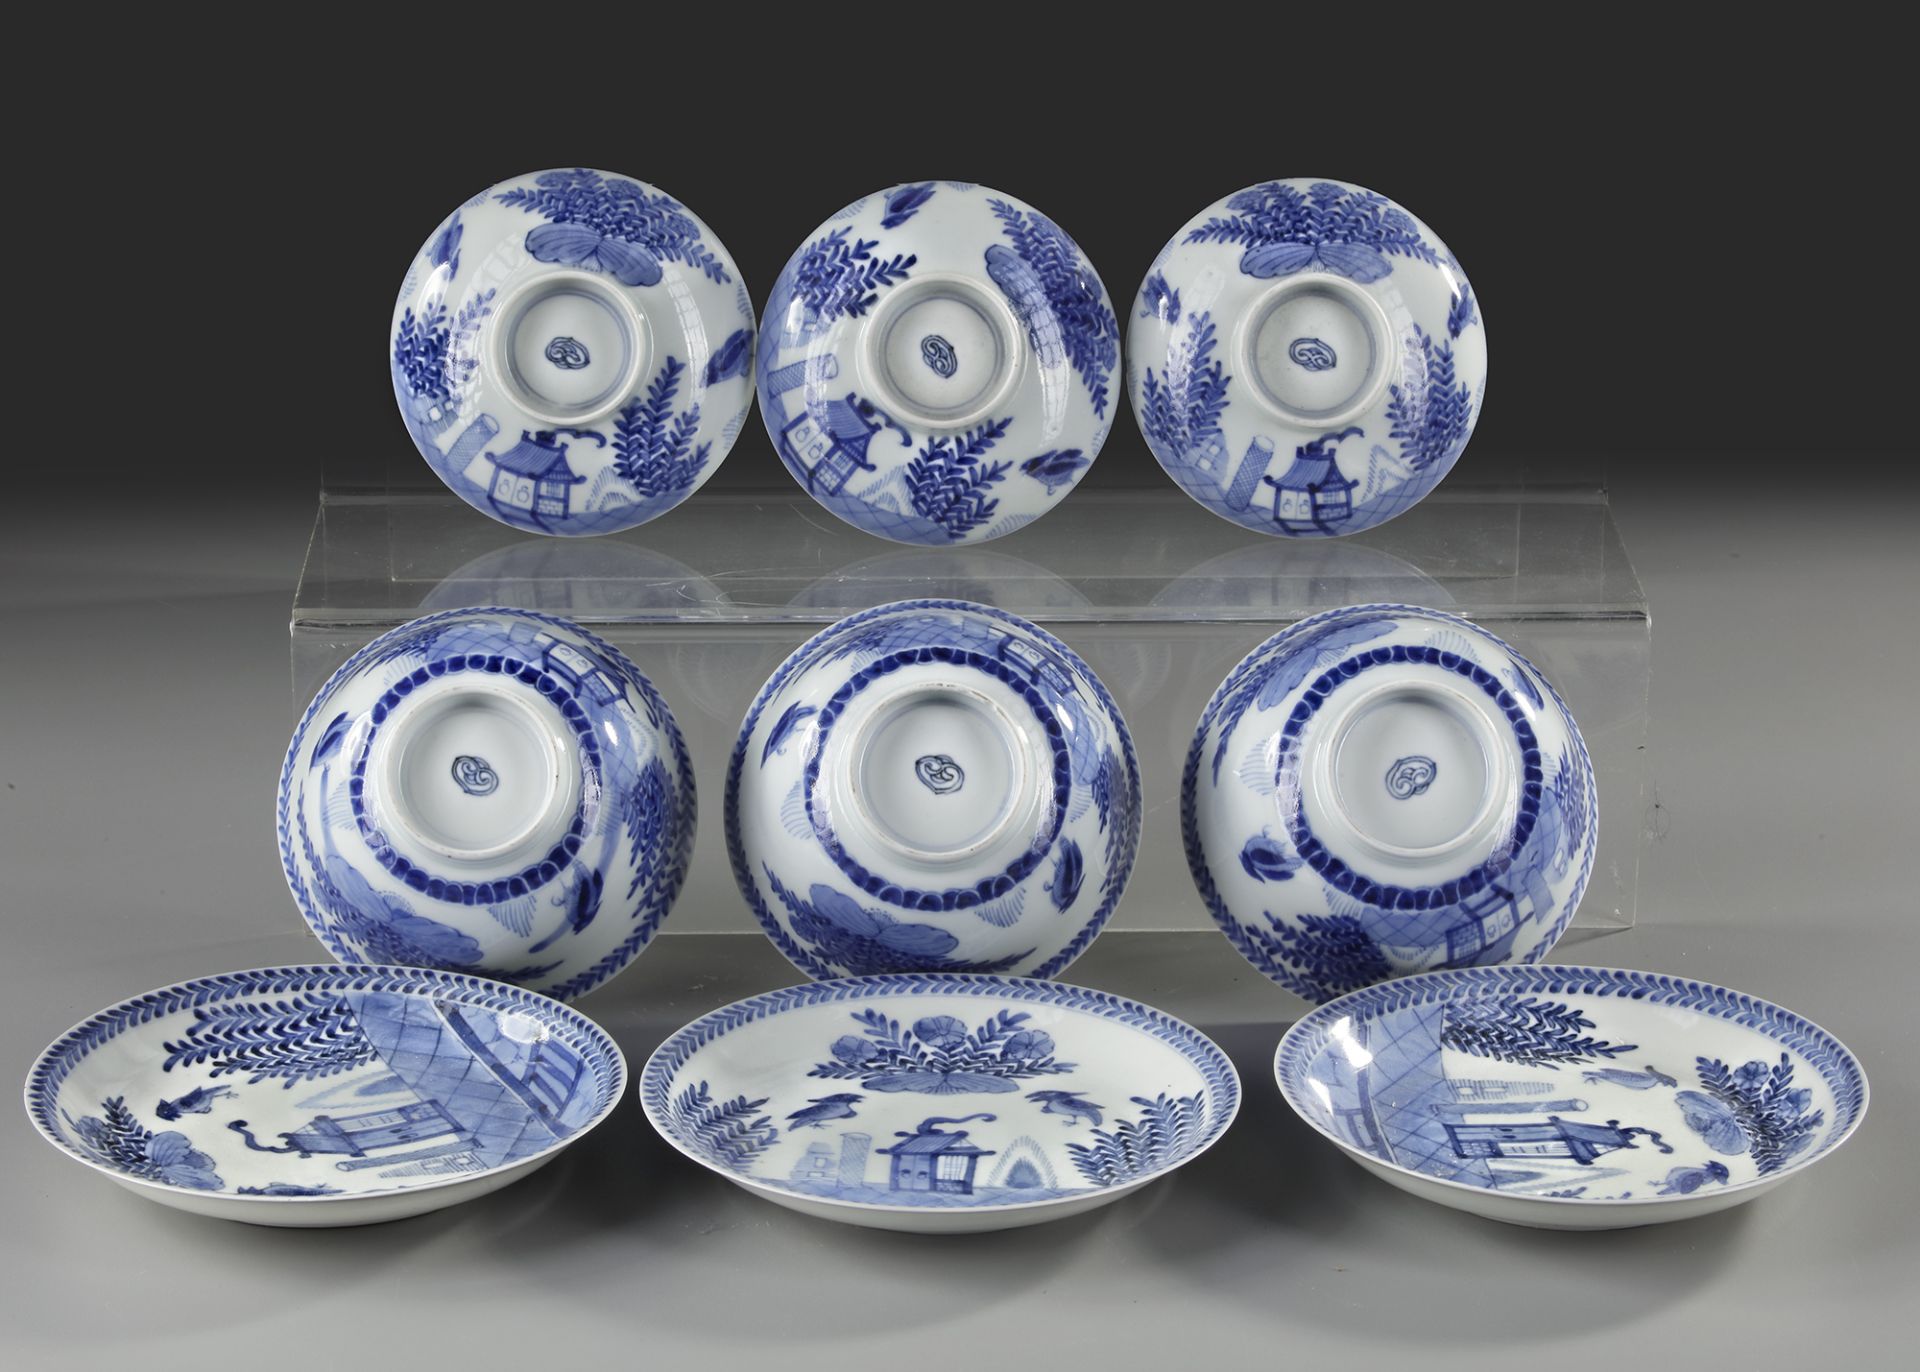 THREE CHINESE BLUE AND WHITE 'CUCKOO IN THE HOUSE' BOWL, COVERS AND SAUCERS, 18TH-19TH CENTURY - Image 4 of 4